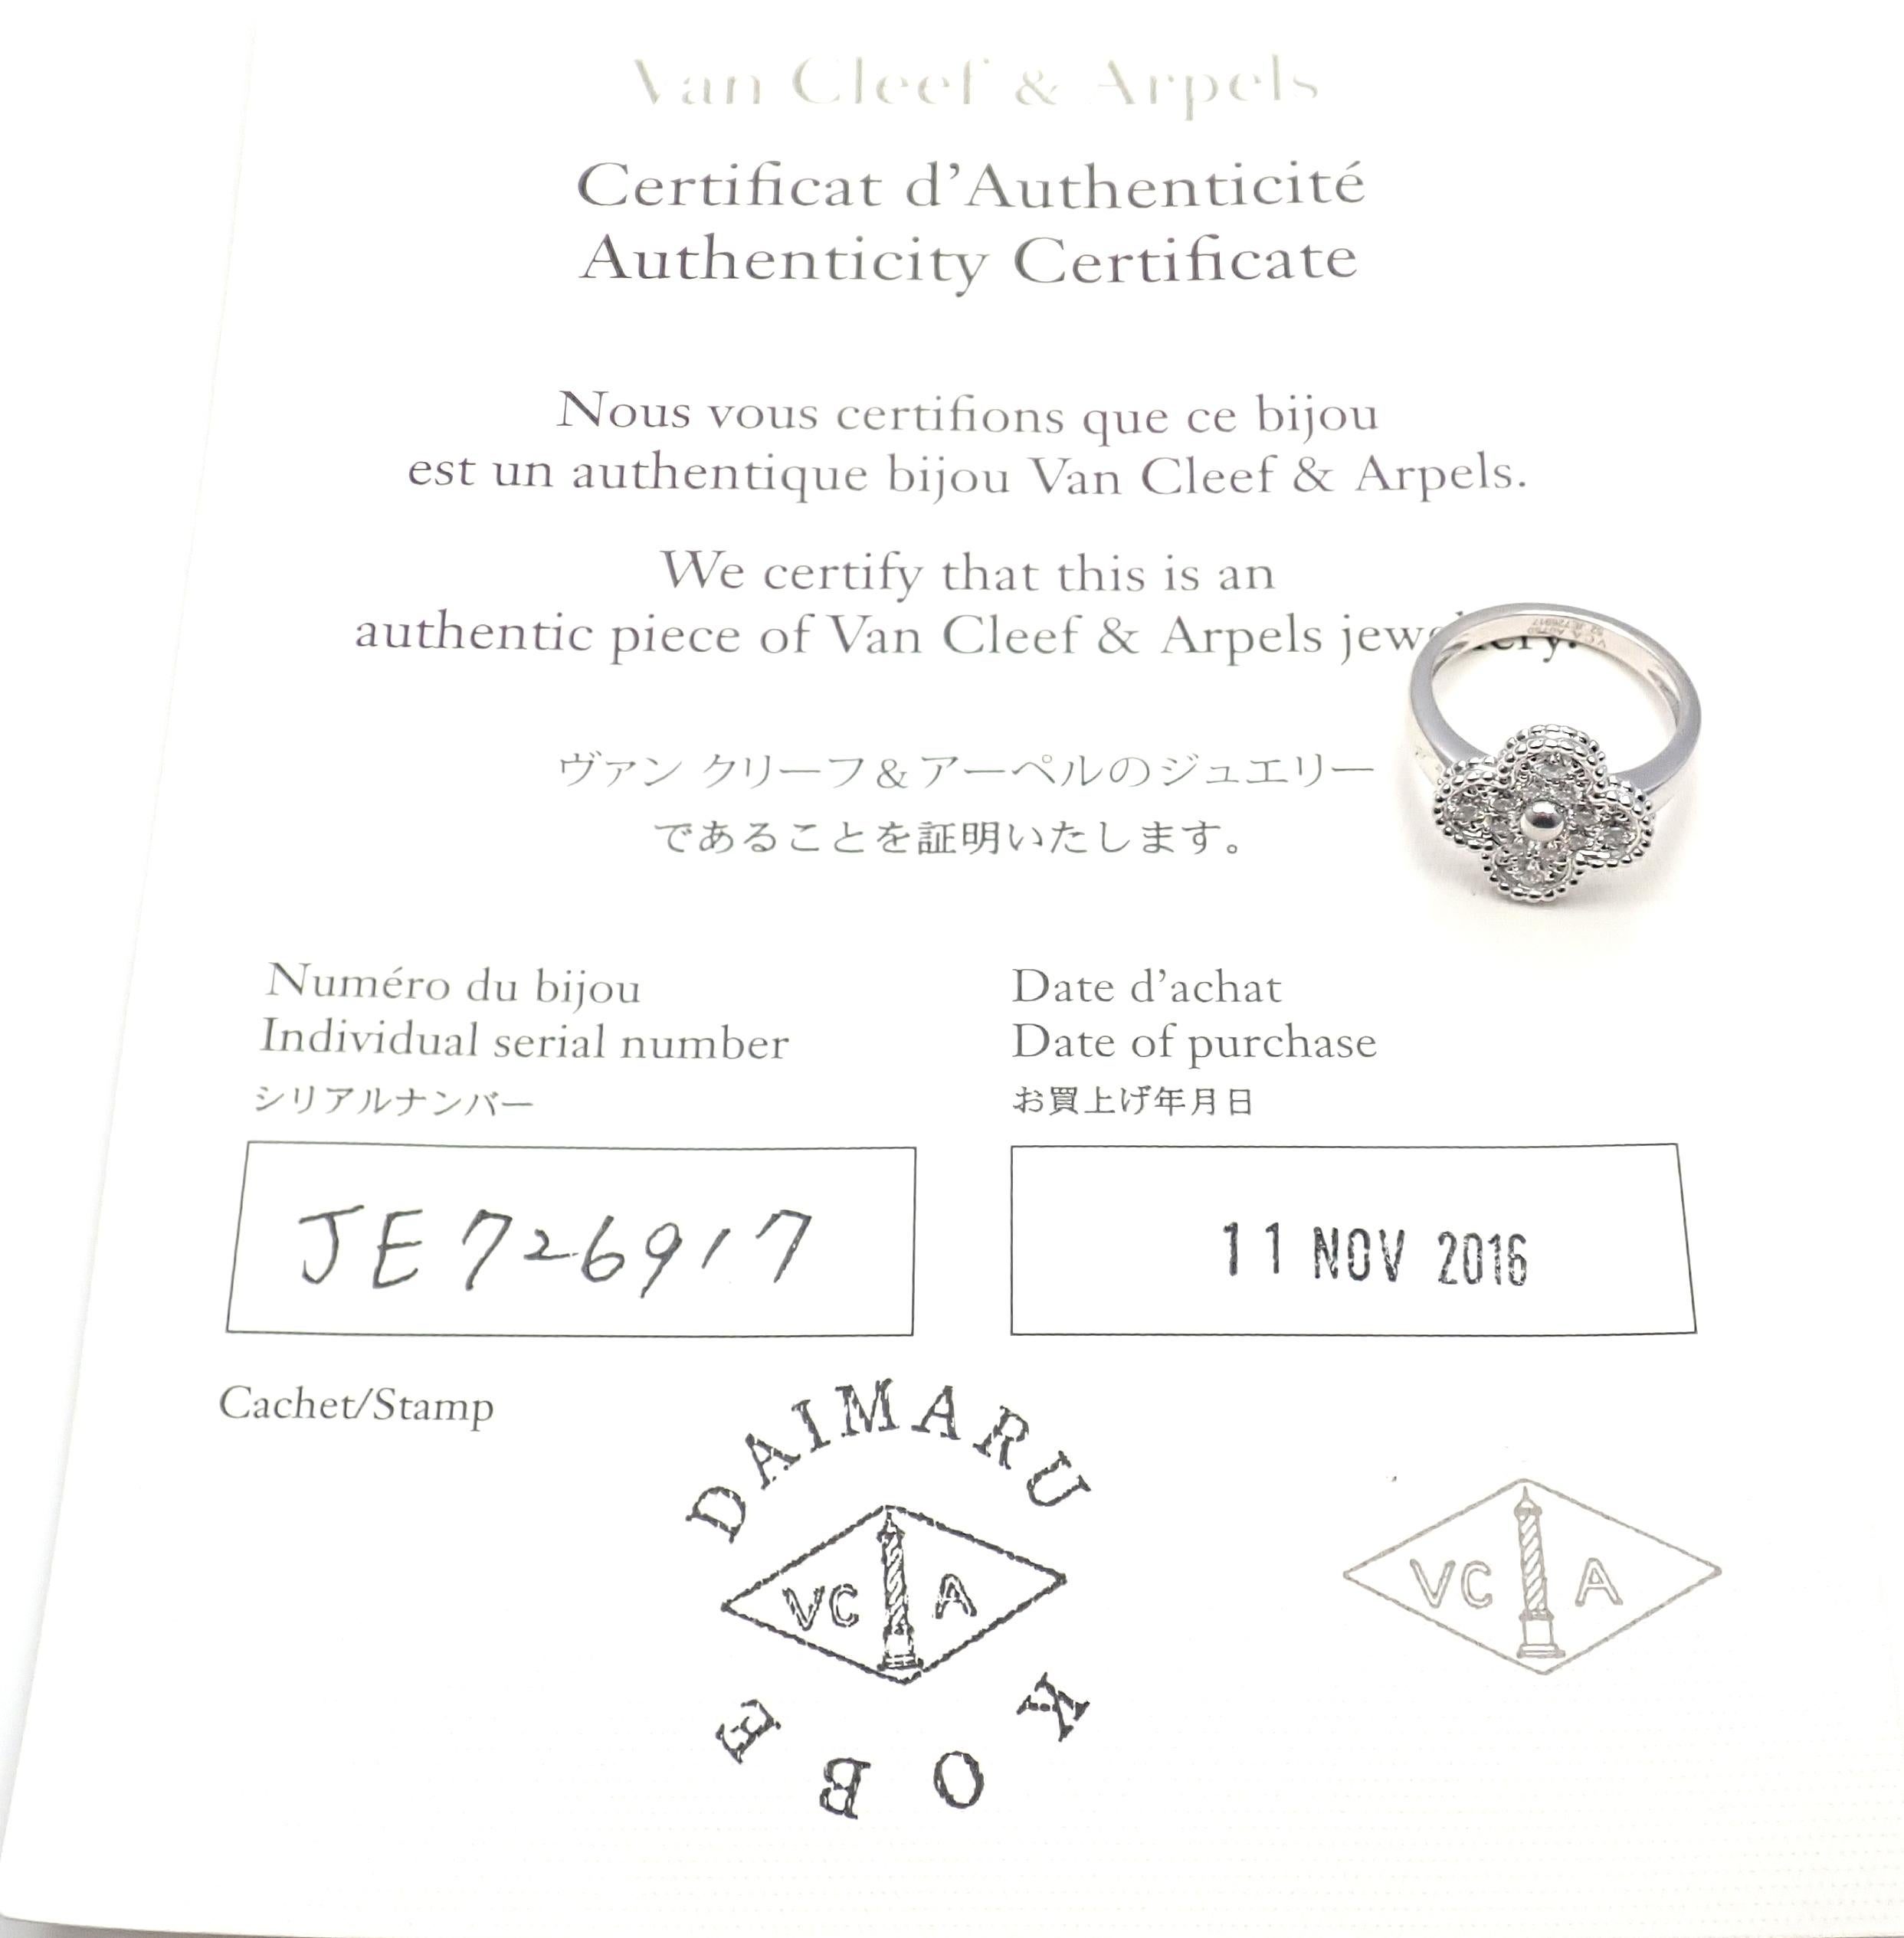 8k White Gold Diamond Vintage Alhambra Ring by Van Cleef & Arpels. 
With 12 round brilliant cut diamond VVS1 clarity, F color total weight .48ct 
This ring comes with Van Cleef & Arpels certificate of authenticity.
Details: 
Size: European 52, US